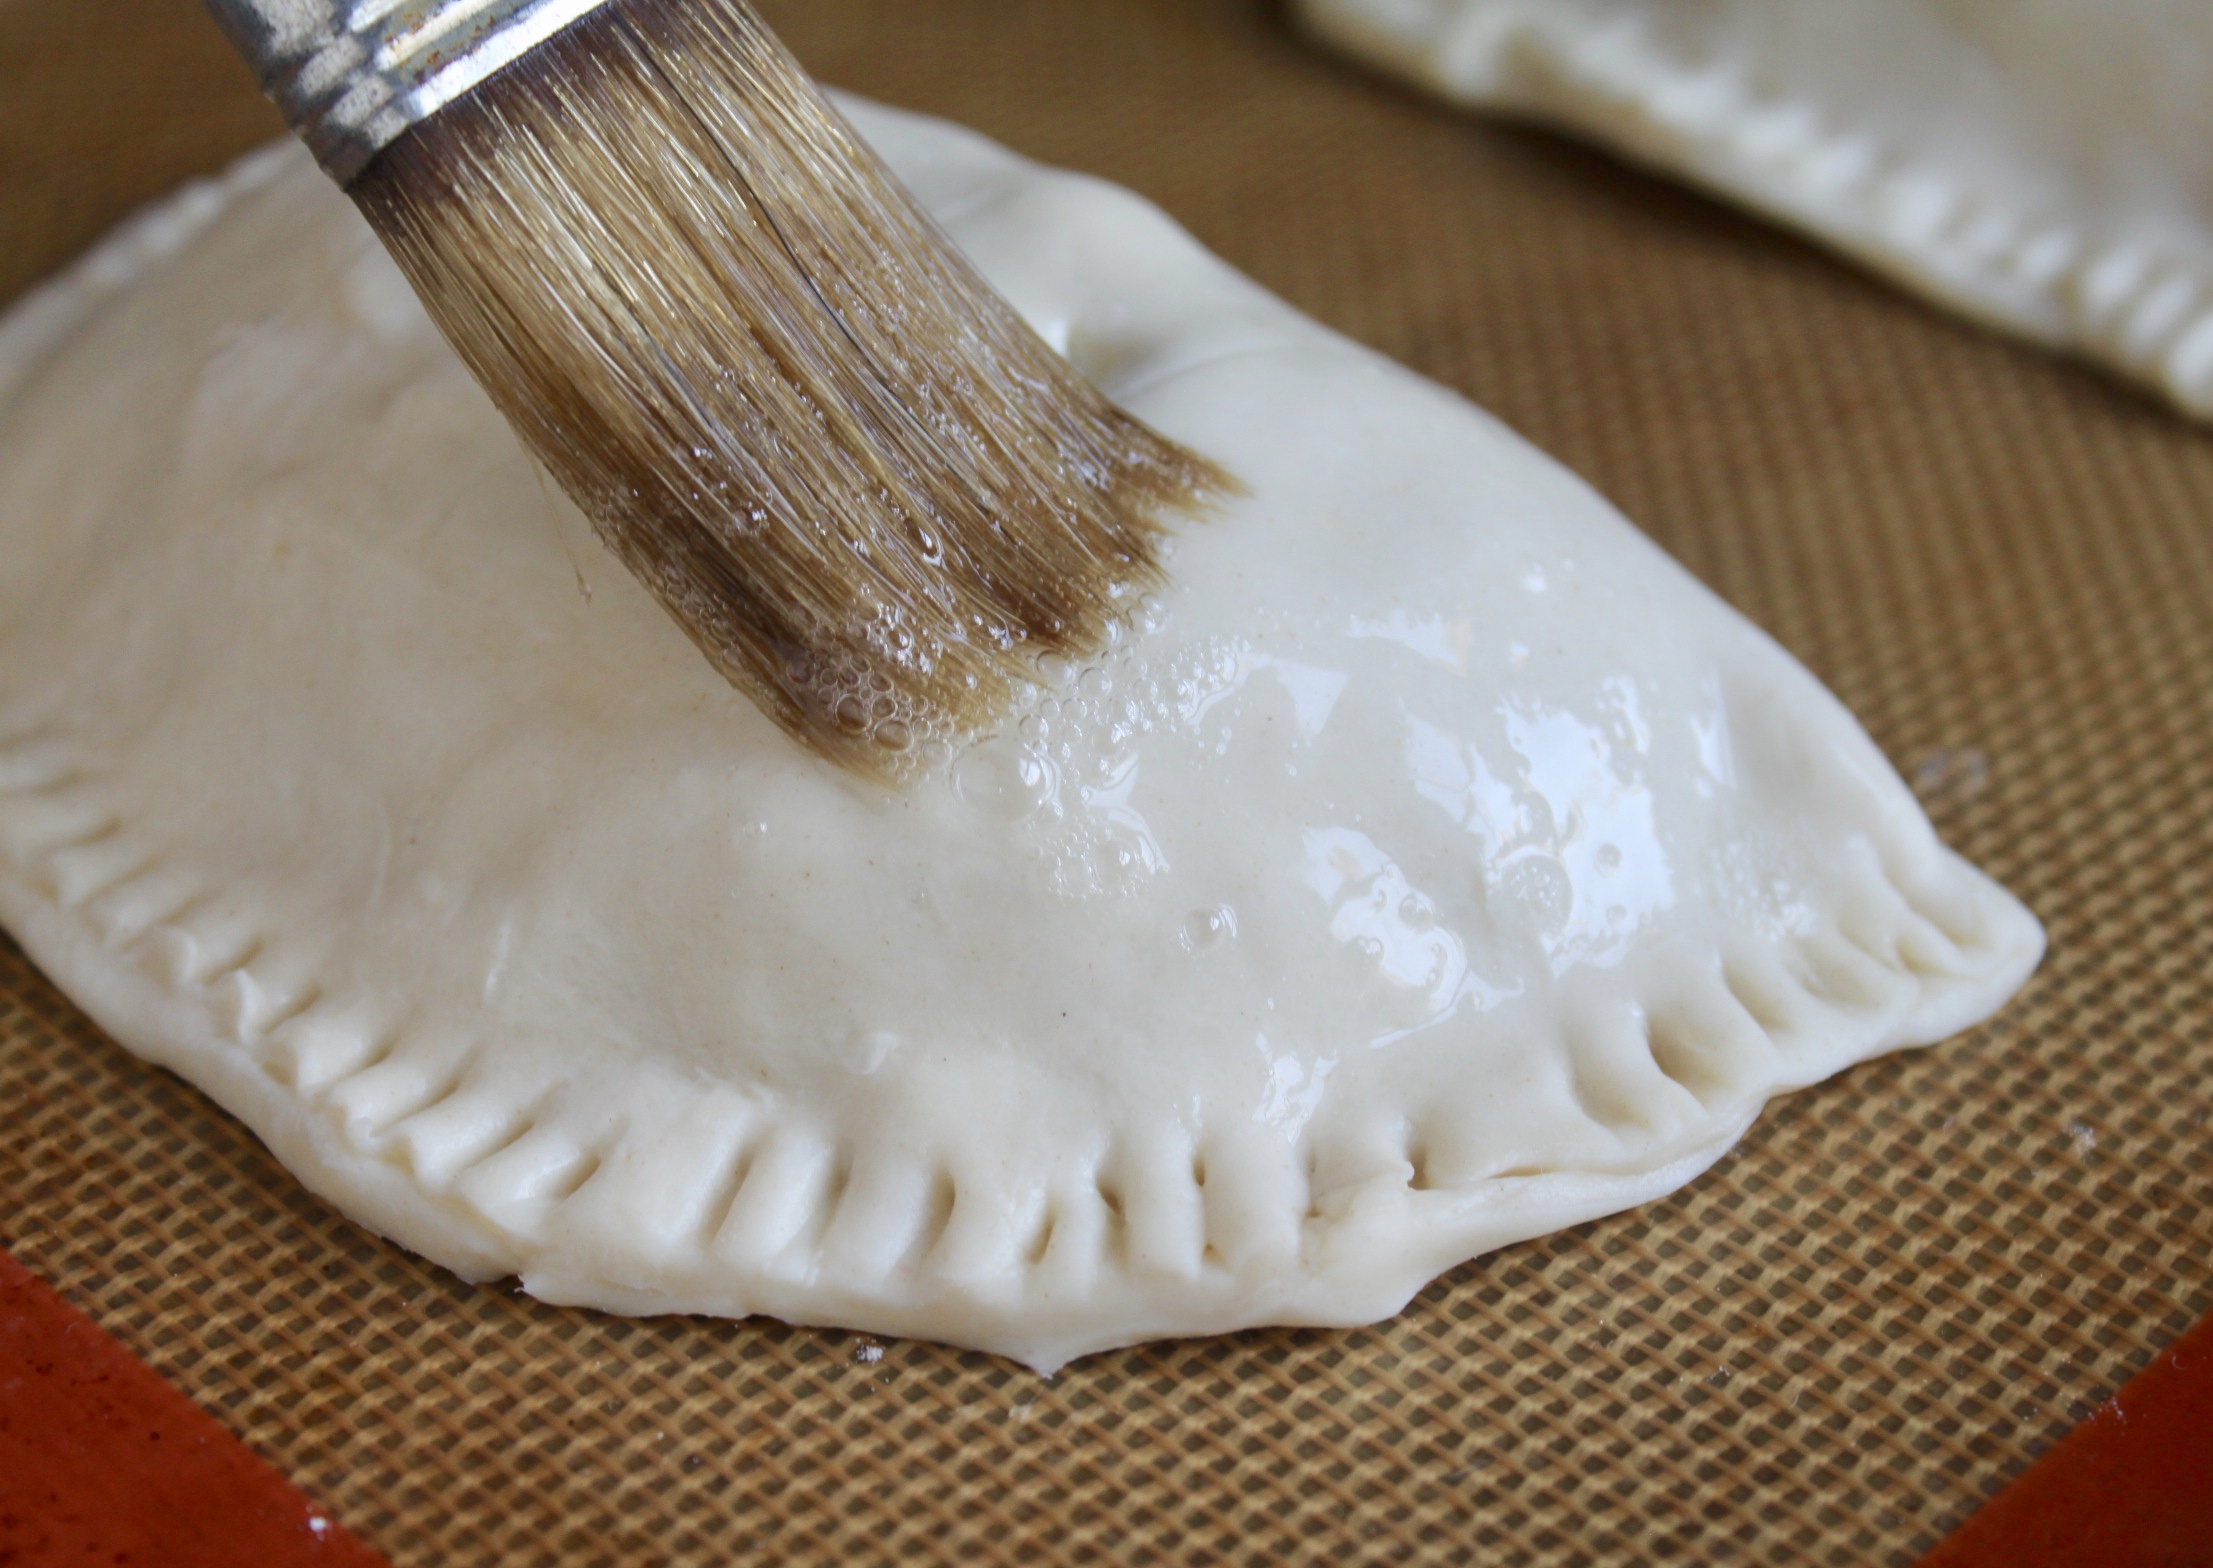 brushing puff pastry with egg white